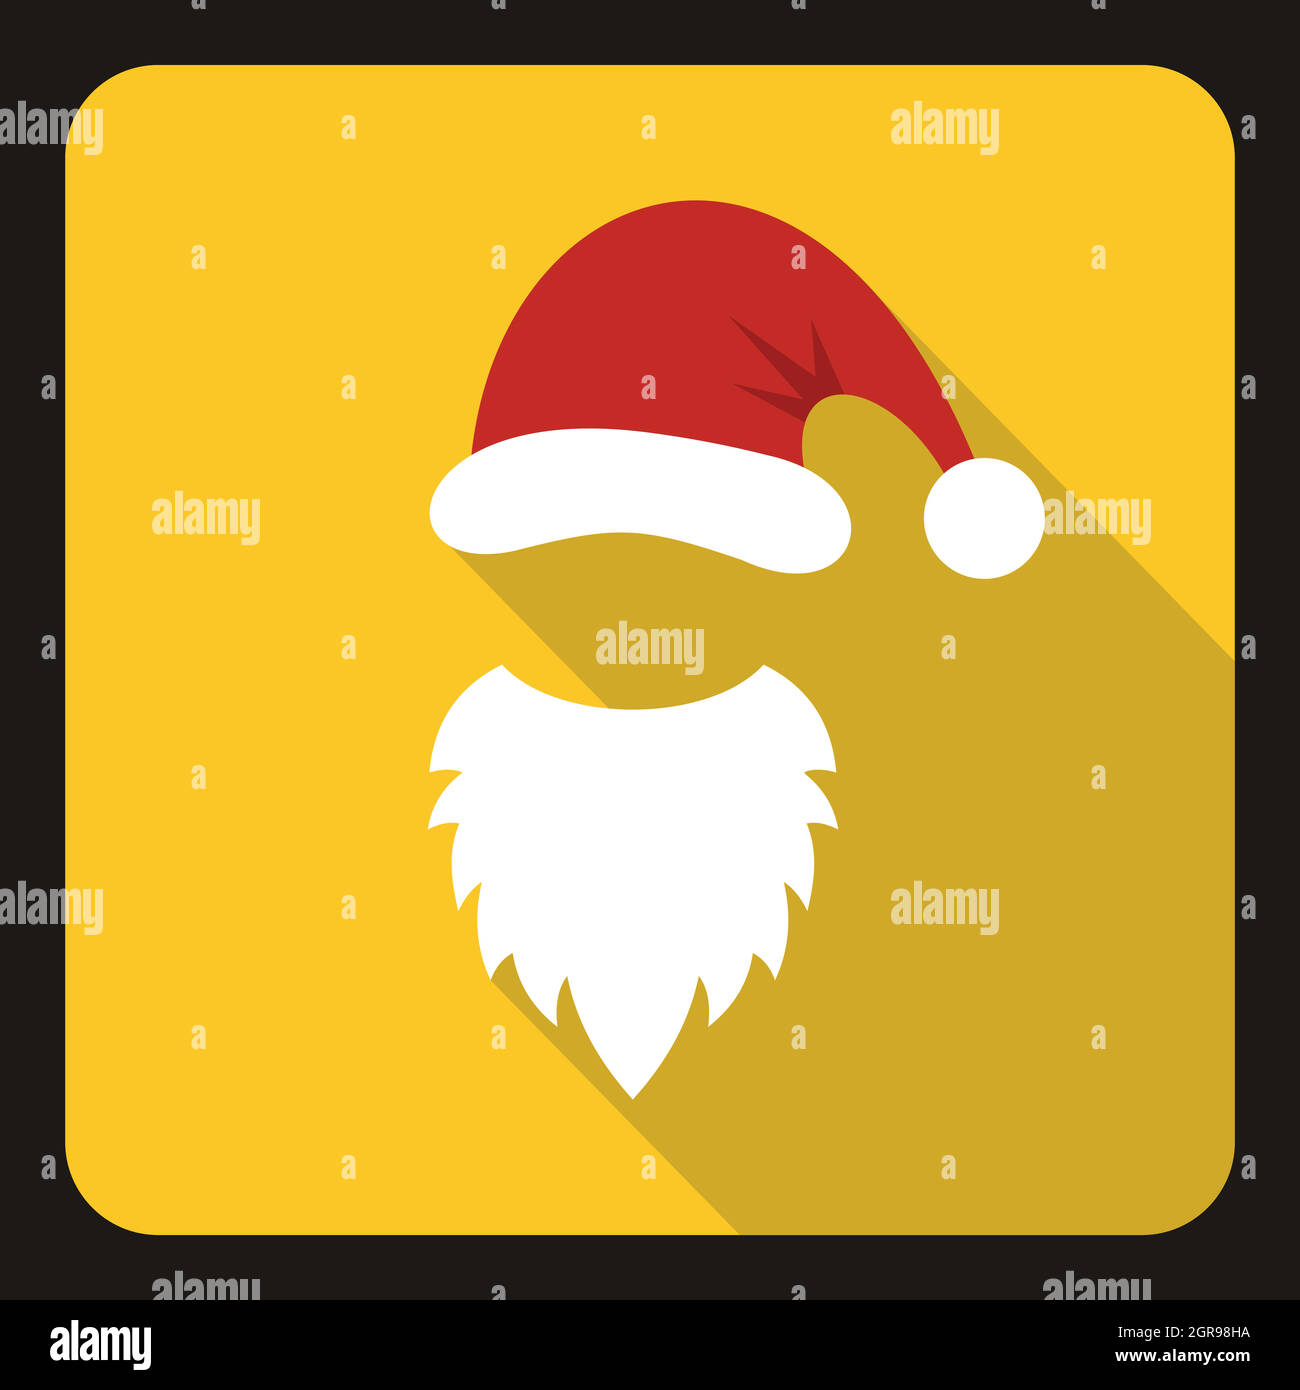 Red hat and white beard of Santa Claus icon Stock Vector